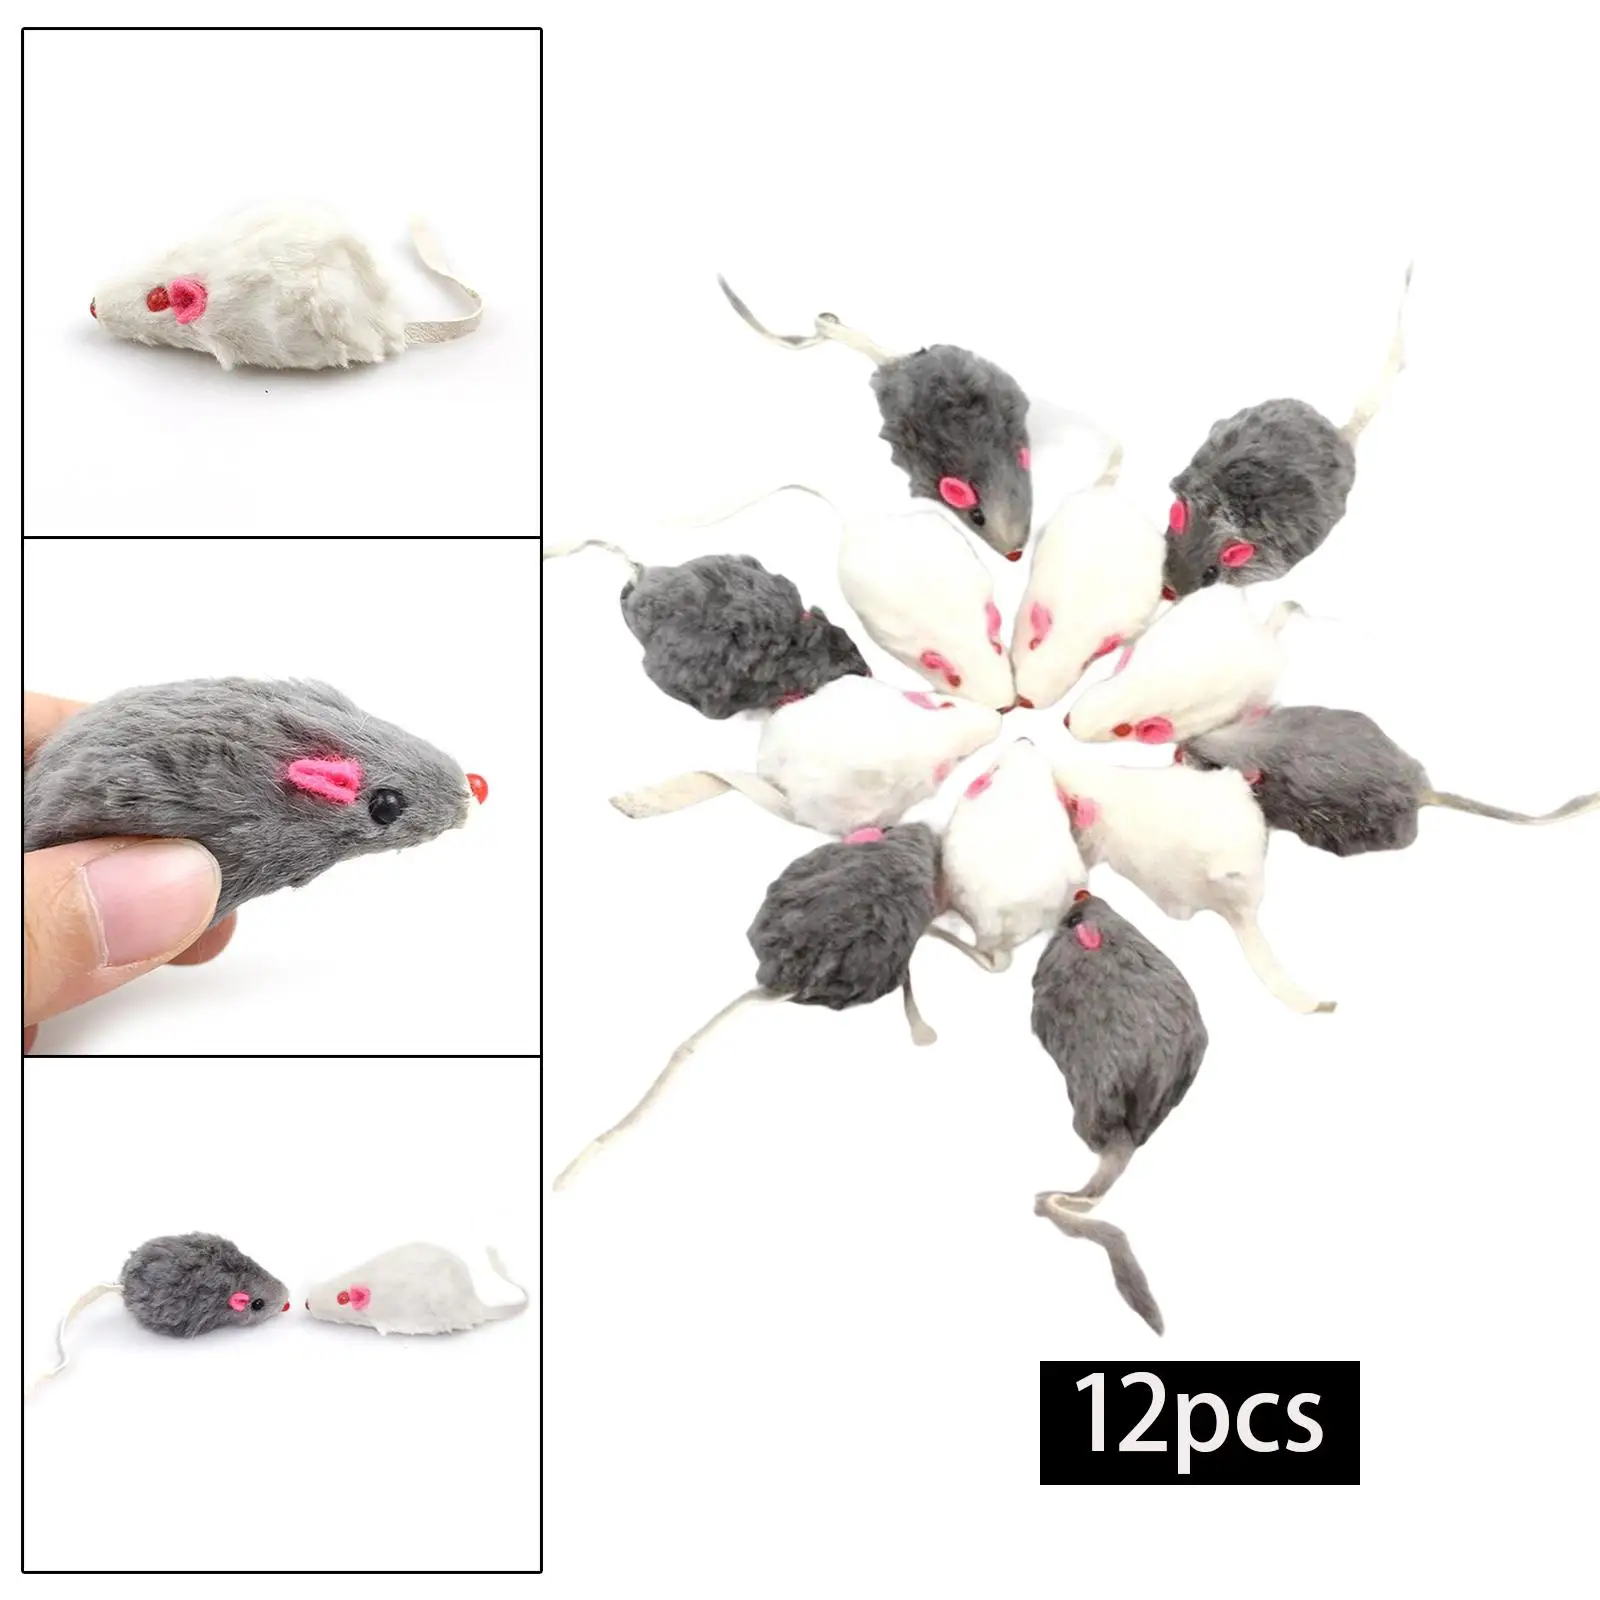 12 Pieces Cat Mice Toy Kitty Chew Toy Soft Stuffed Animals Teaser for Cats and Kitten Training